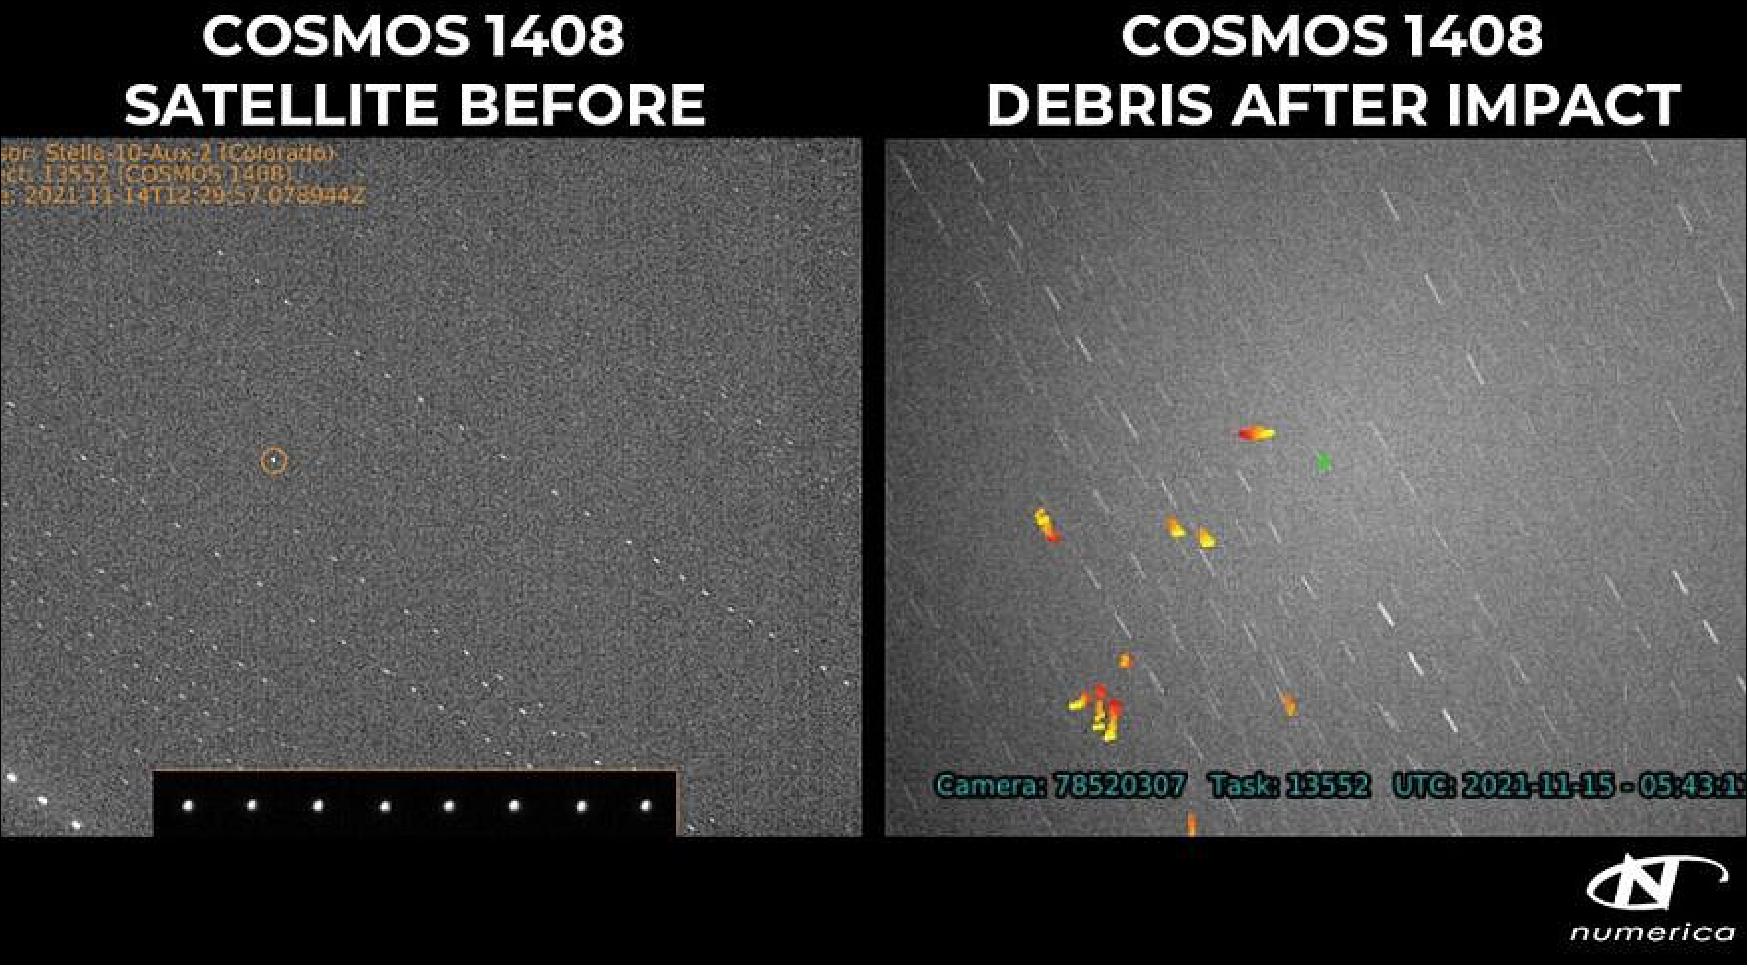 Figure 43: Numerica and Slingshot Aerospace produced these images of the resulting debris from the Russian missile that blew up Cosmos 1408 (image credit: Numerica, Slingshot)